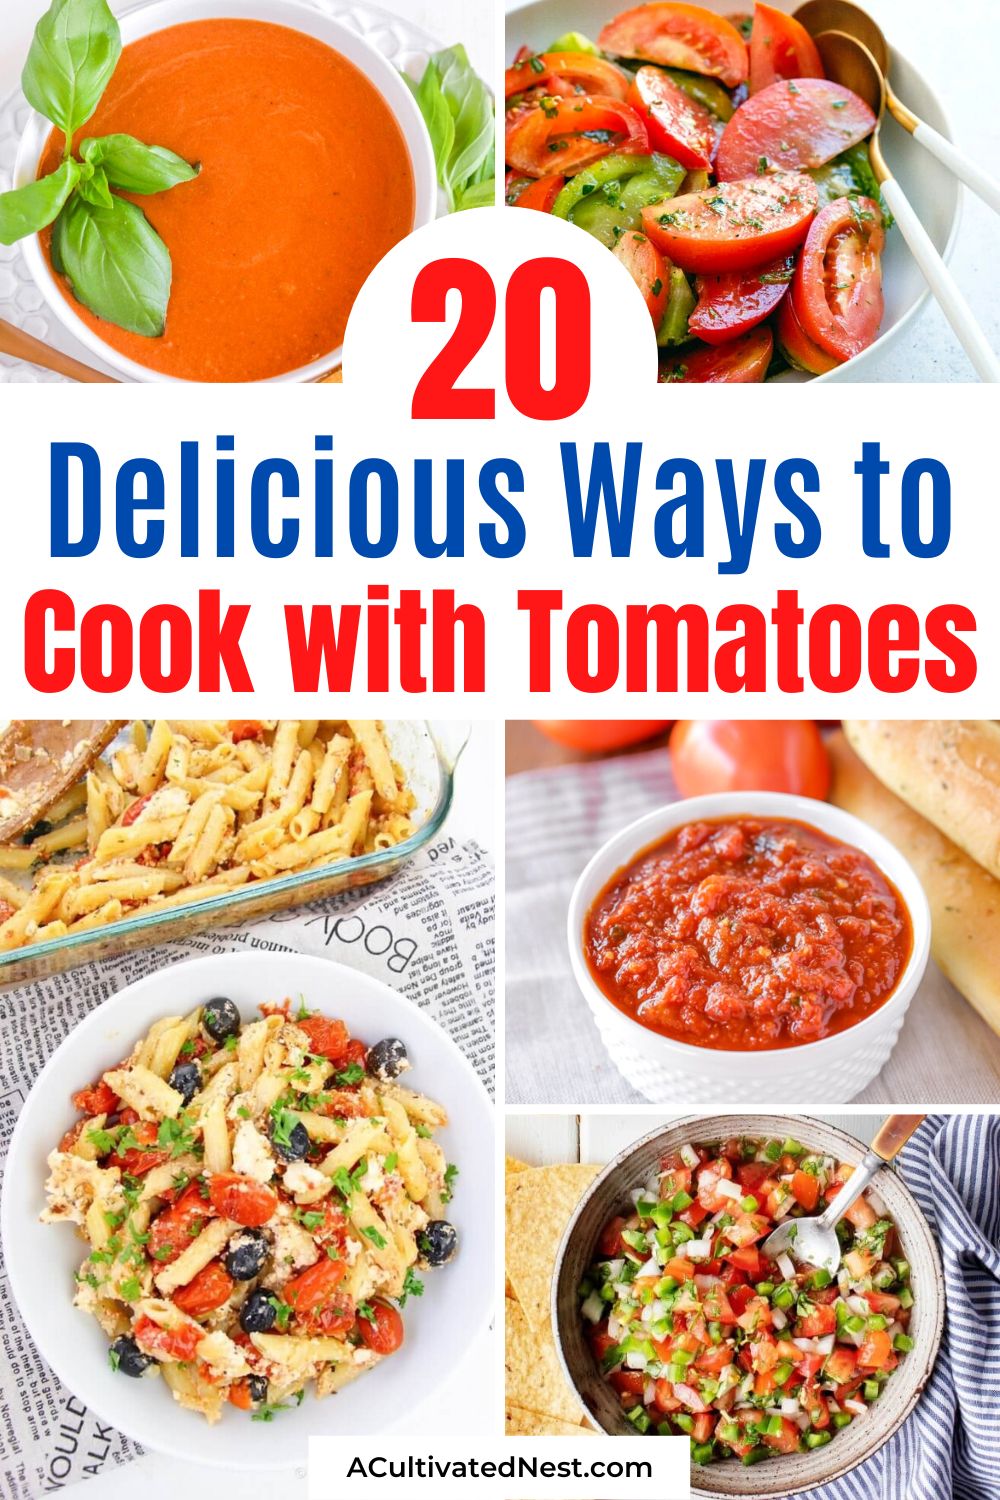 20 Delicious Ways to Use Homegrown Tomatoes- If you've grown a lot of tomatoes or bought too many at the store, check out these delicious ways to use tomatoes! Get the most out of your garden with these recipes for your produce! | #recipe #tomato #tomatoRecipes #vegetarian #ACultivatedNest